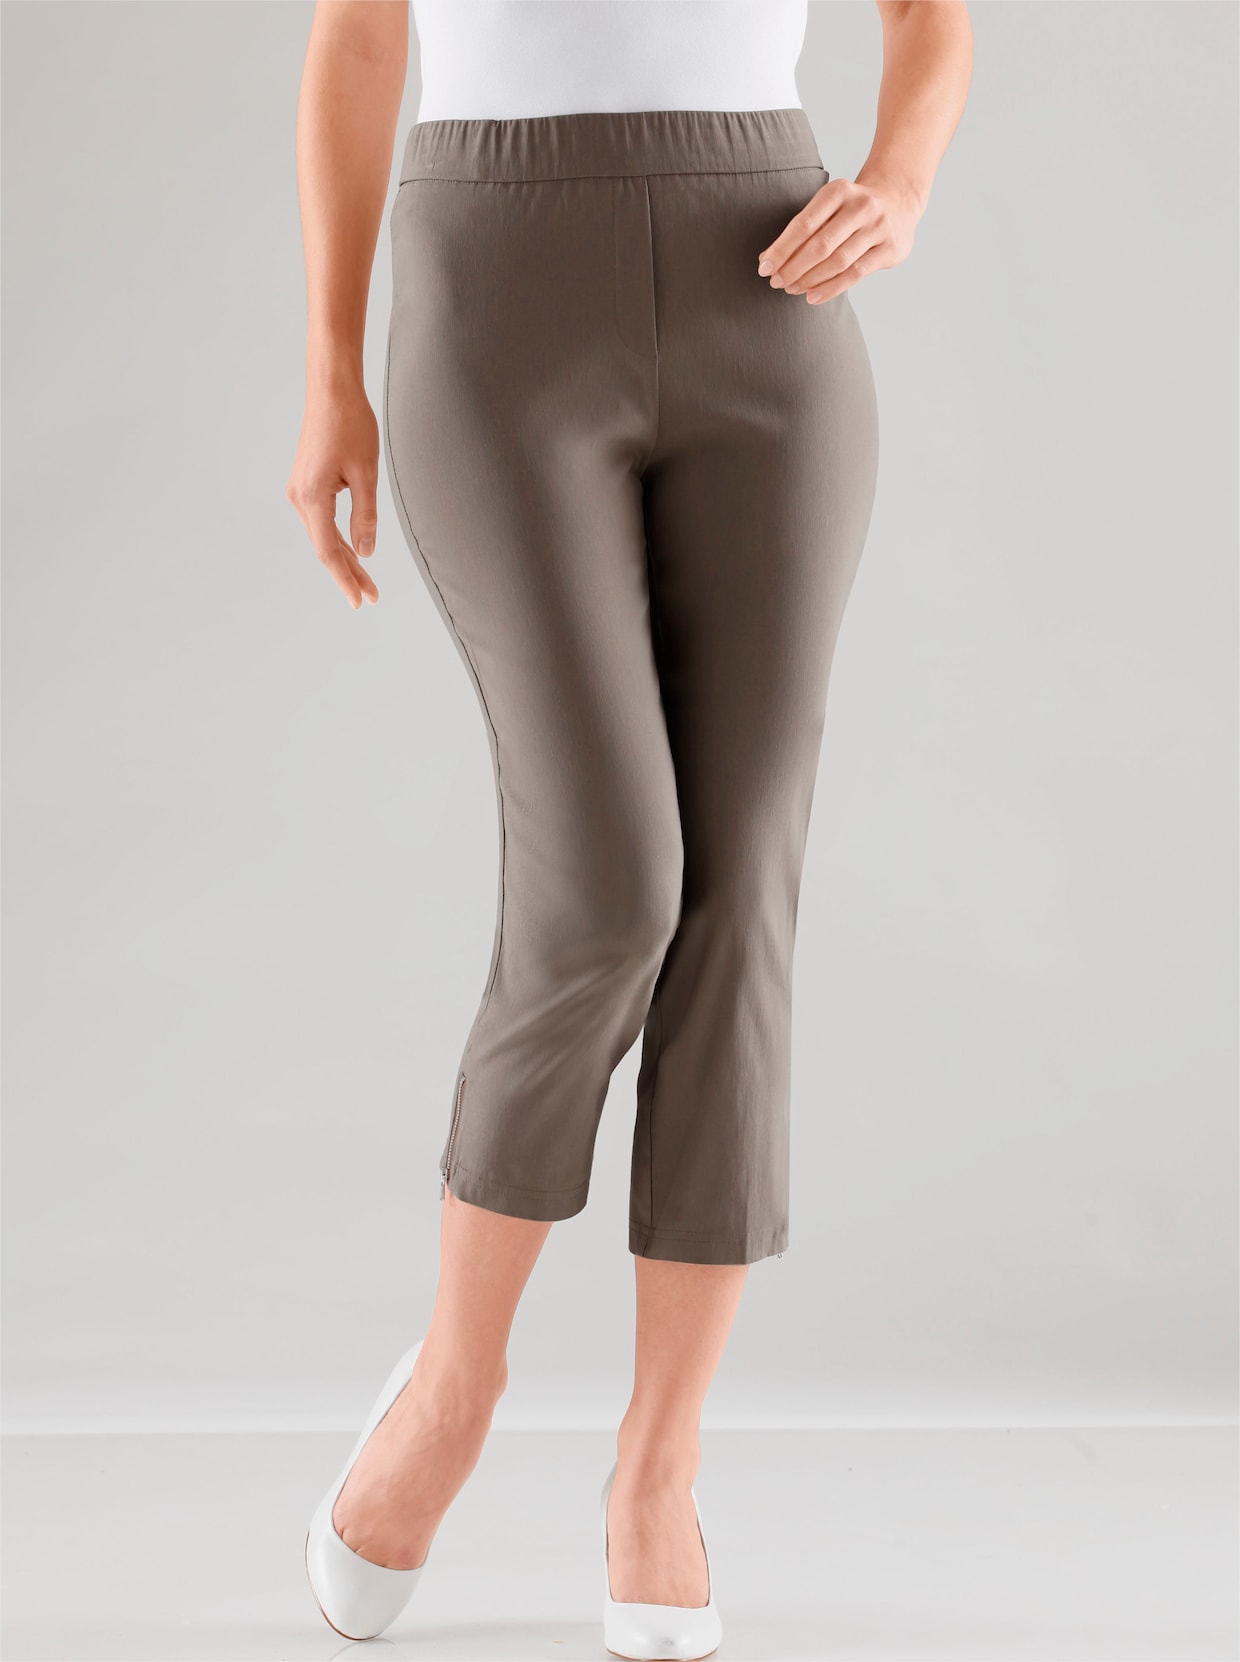 Adelina by Scheiter 7/8-Hose - taupe